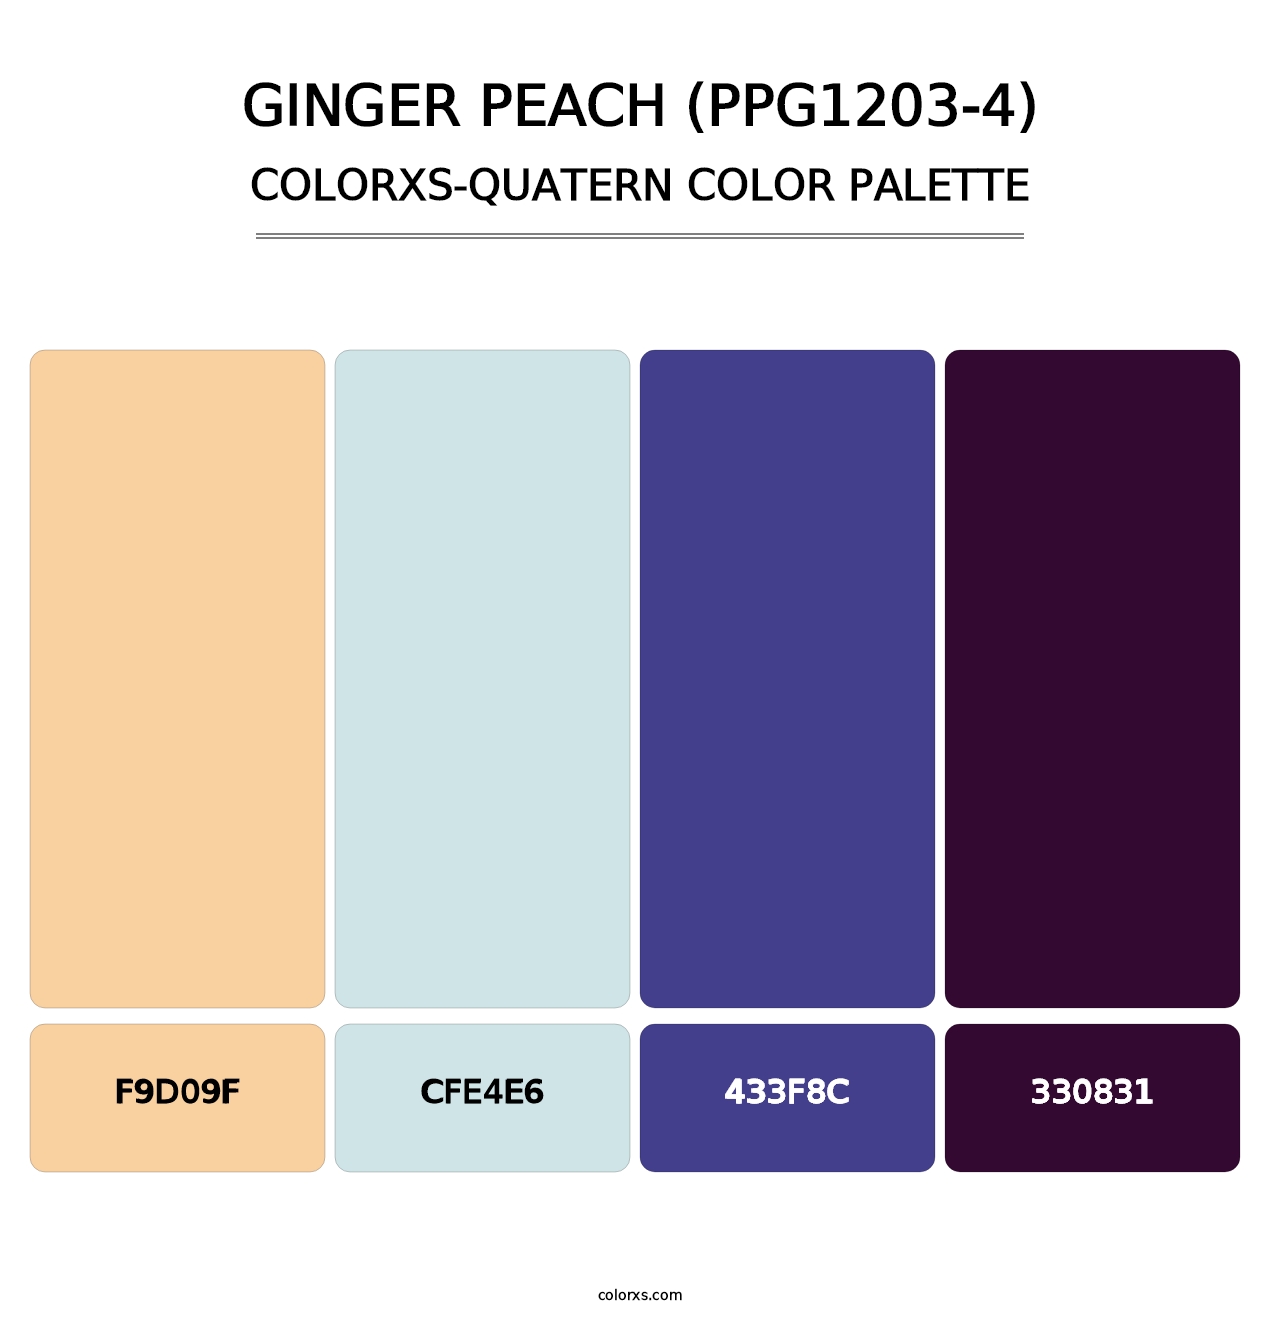 Ginger Peach (PPG1203-4) - Colorxs Quatern Palette